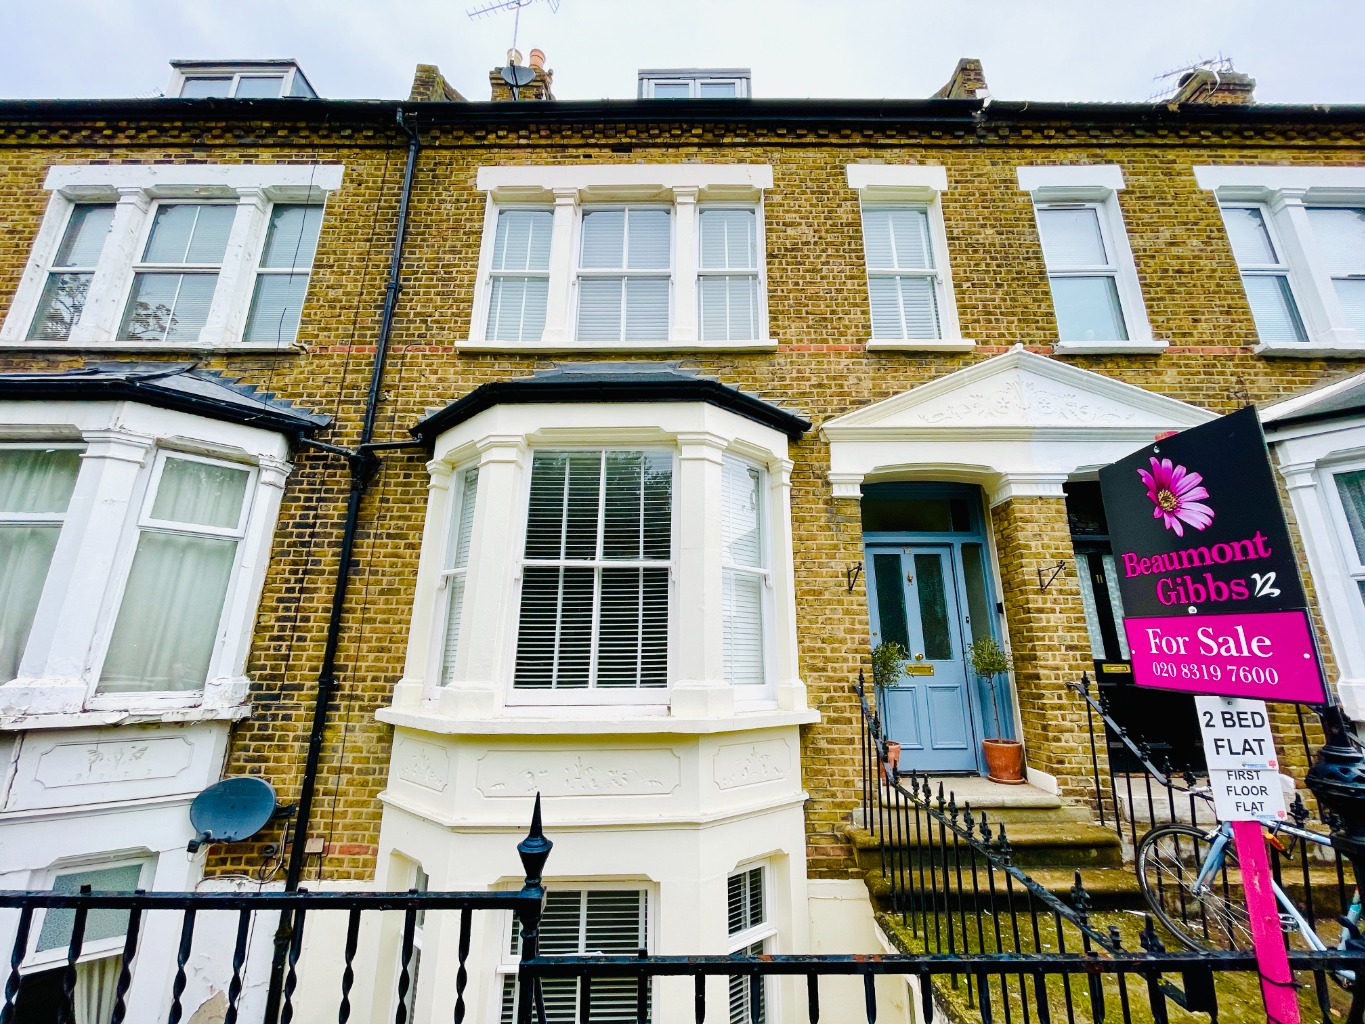 Beaumont Gibbs are offering for sale this beautiful two double bedroom split level Victorian conversion flat for sale. The property is in a lovely location opposite parkland and close to local amenities as well. The flat is being offered with immediate vacant possession.